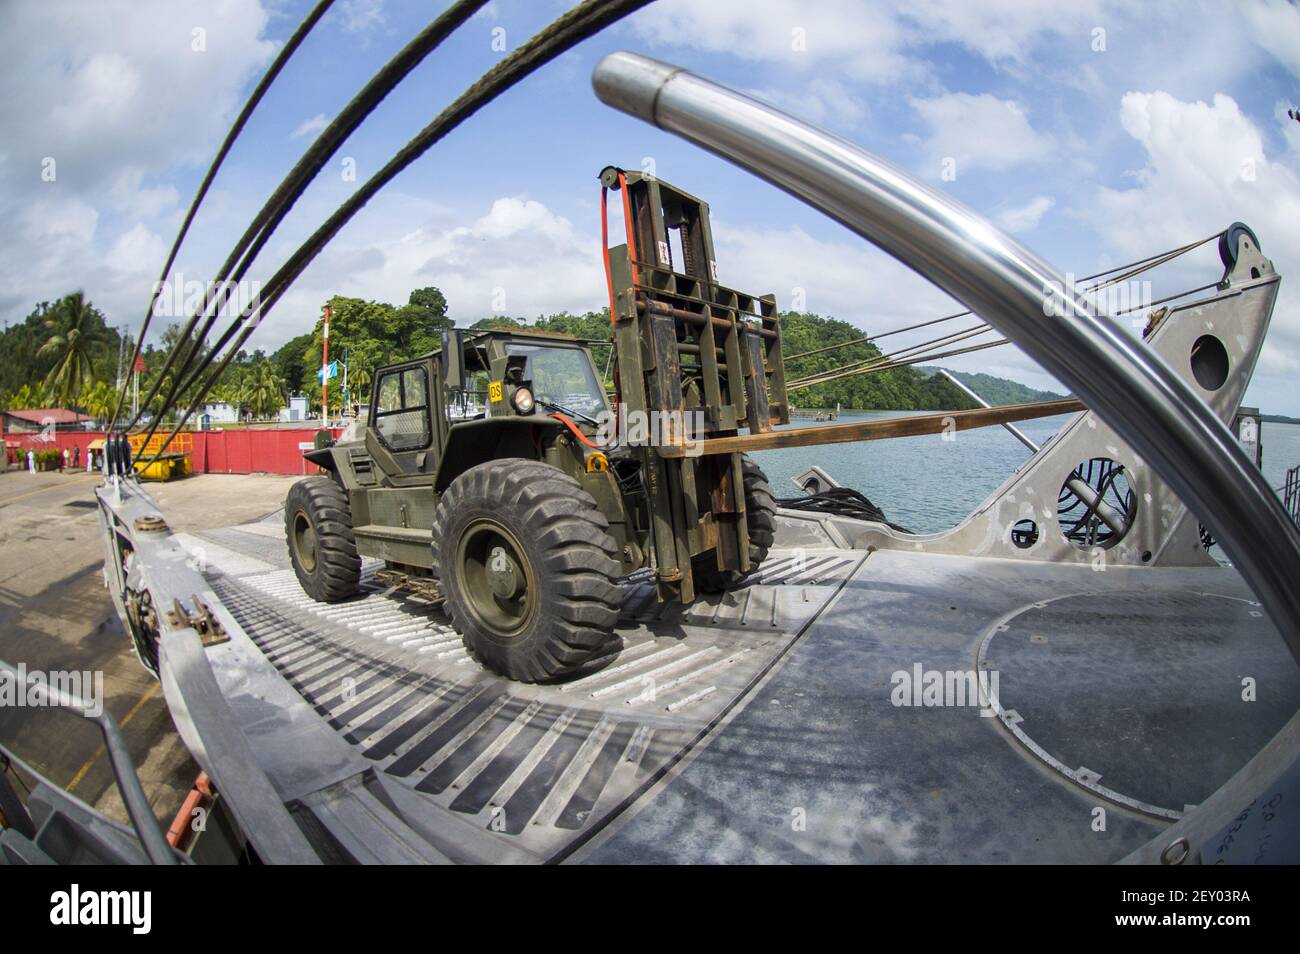 U.S. military and civilian personnel assigned to the joint high speed vessel USNS Spearhead (JHSV 1) work on unloading equipment from the ship in Puerto Barrios, Guatemala, July 22, 2014, during Southern Partnership Station (SPS) 2014. SPS is an annual deployment of U.S. ships to the U.S. Southern Command's area of responsibility in the Caribbean and Latin America. The exercise involves information sharing with navies, coast guards and civilian services throughout the region. (Photo by Mass Communication Specialist 3rd Class Andrew Schneider, U.S. Navy/DoD/Sipa USA) Stock Photo